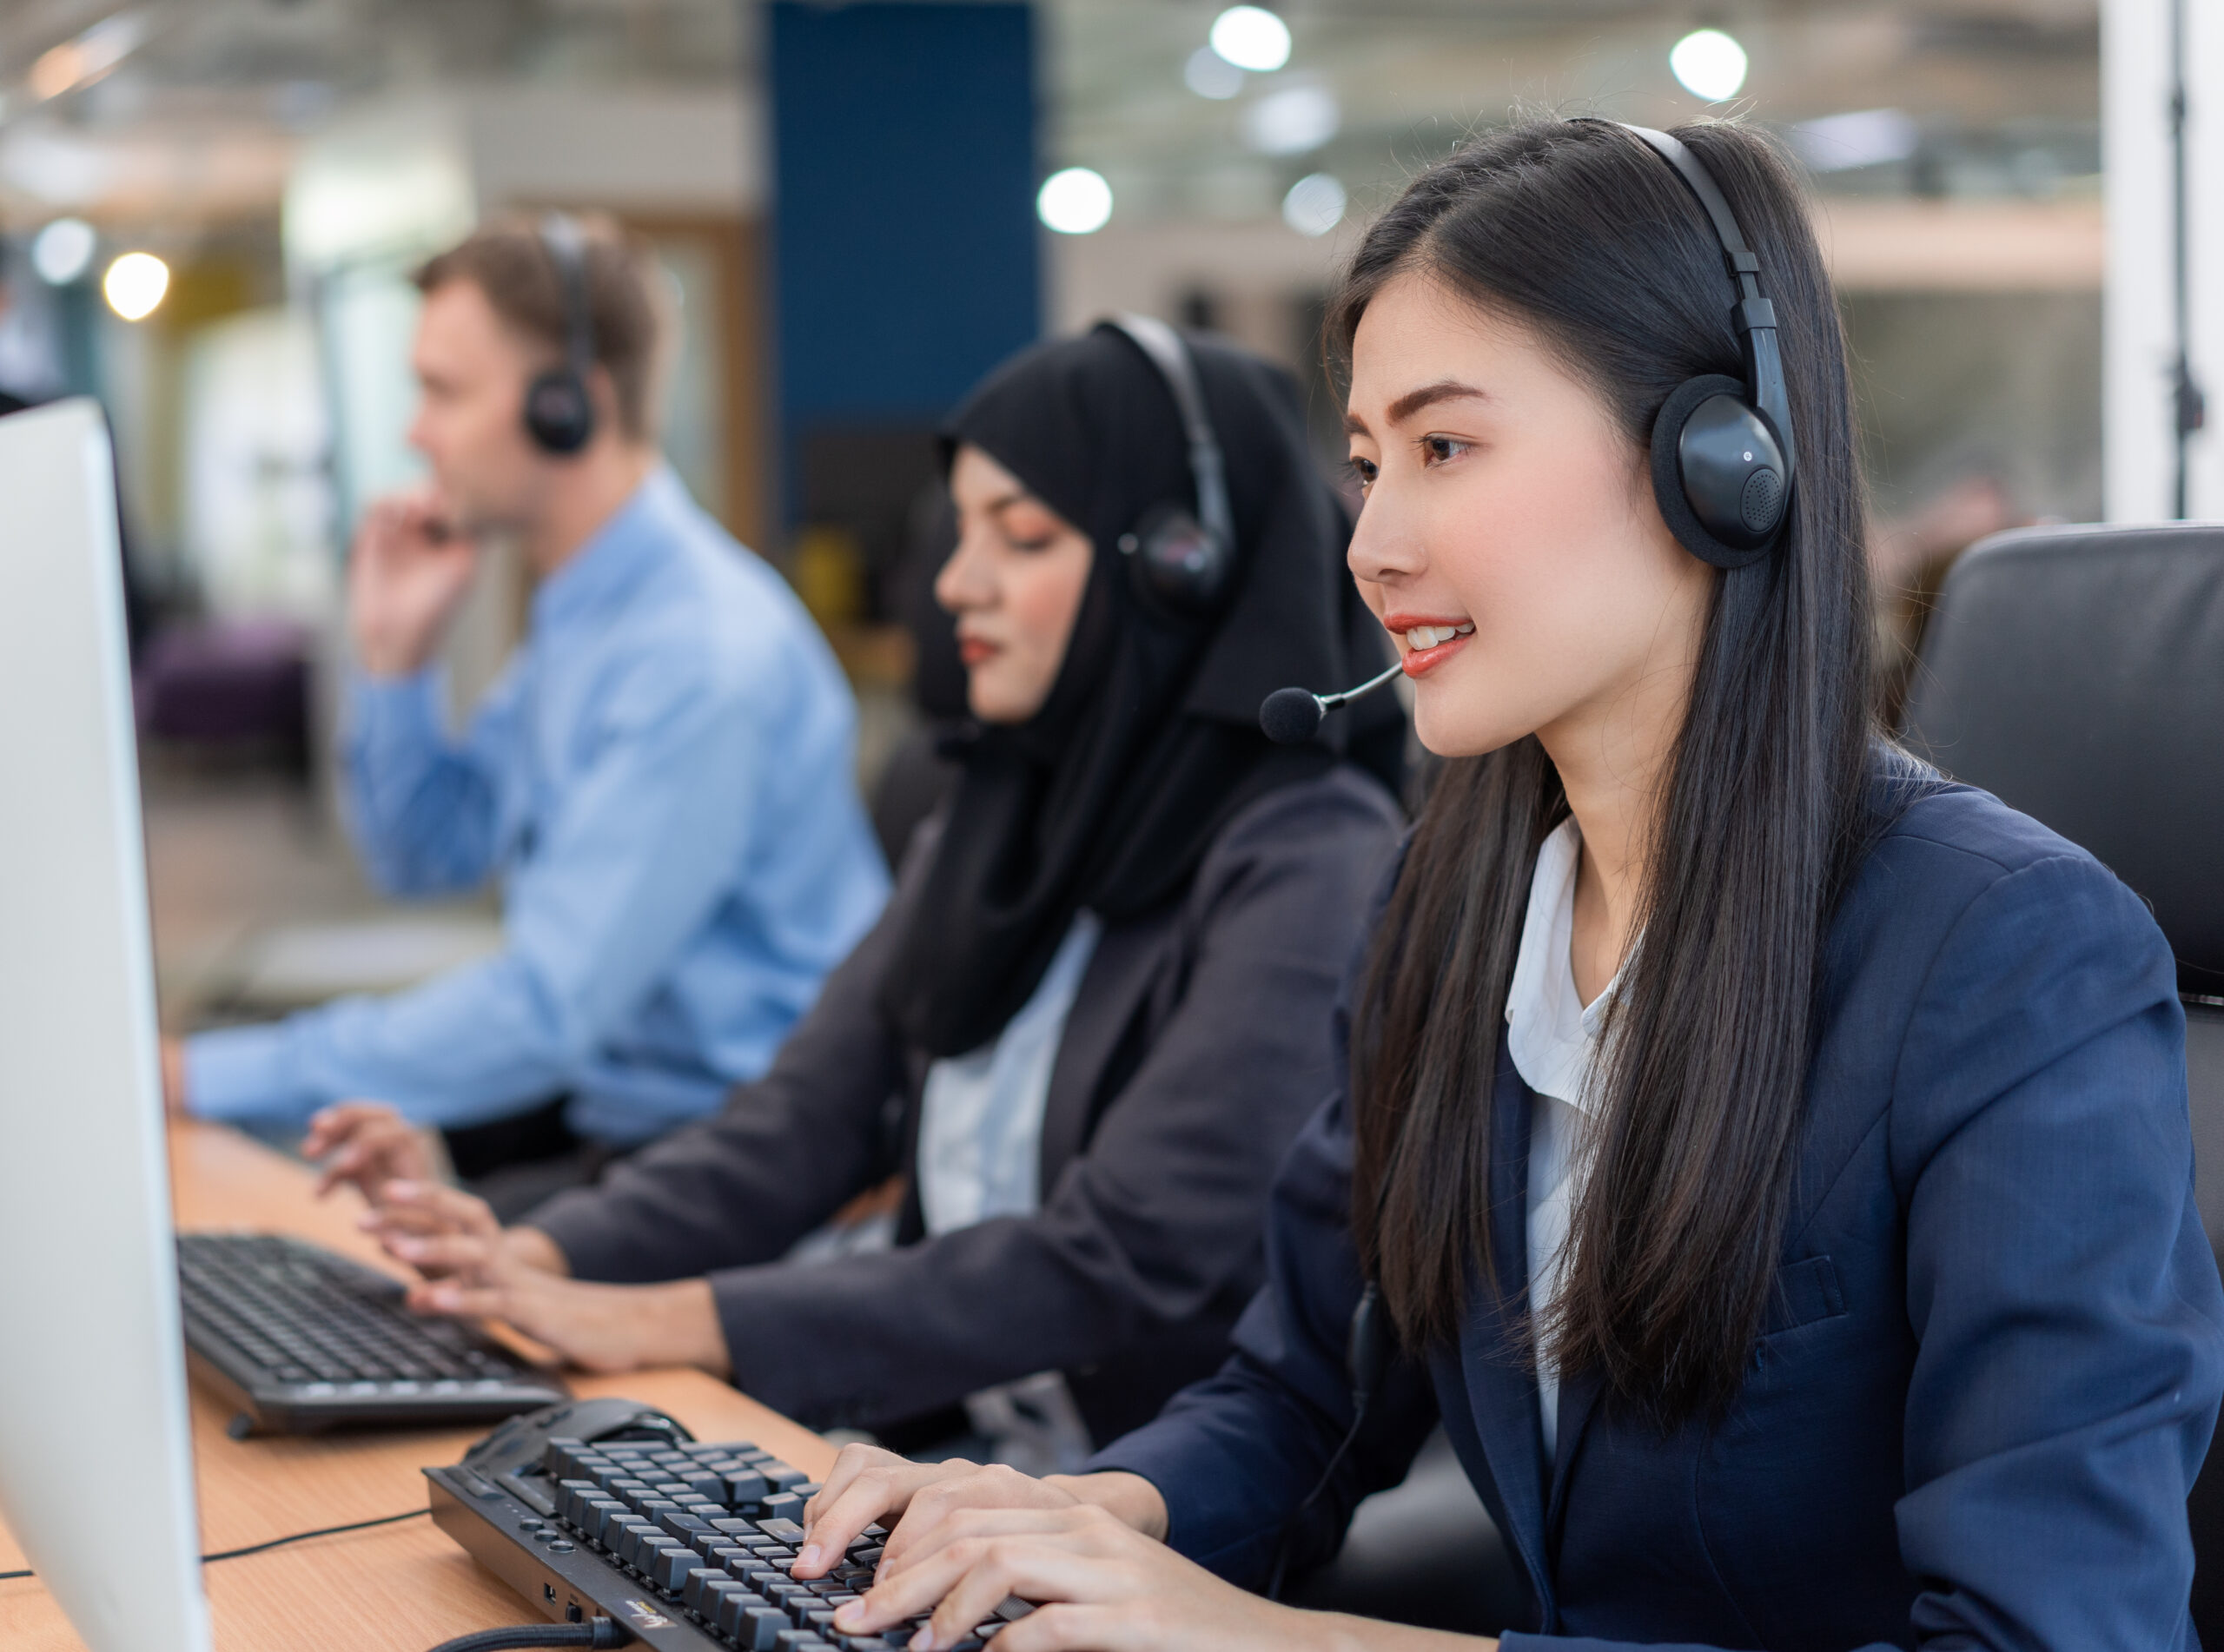 happy-smiling-operator-asian-woman-customer-service-agent-with-headsets-scaled.jpg